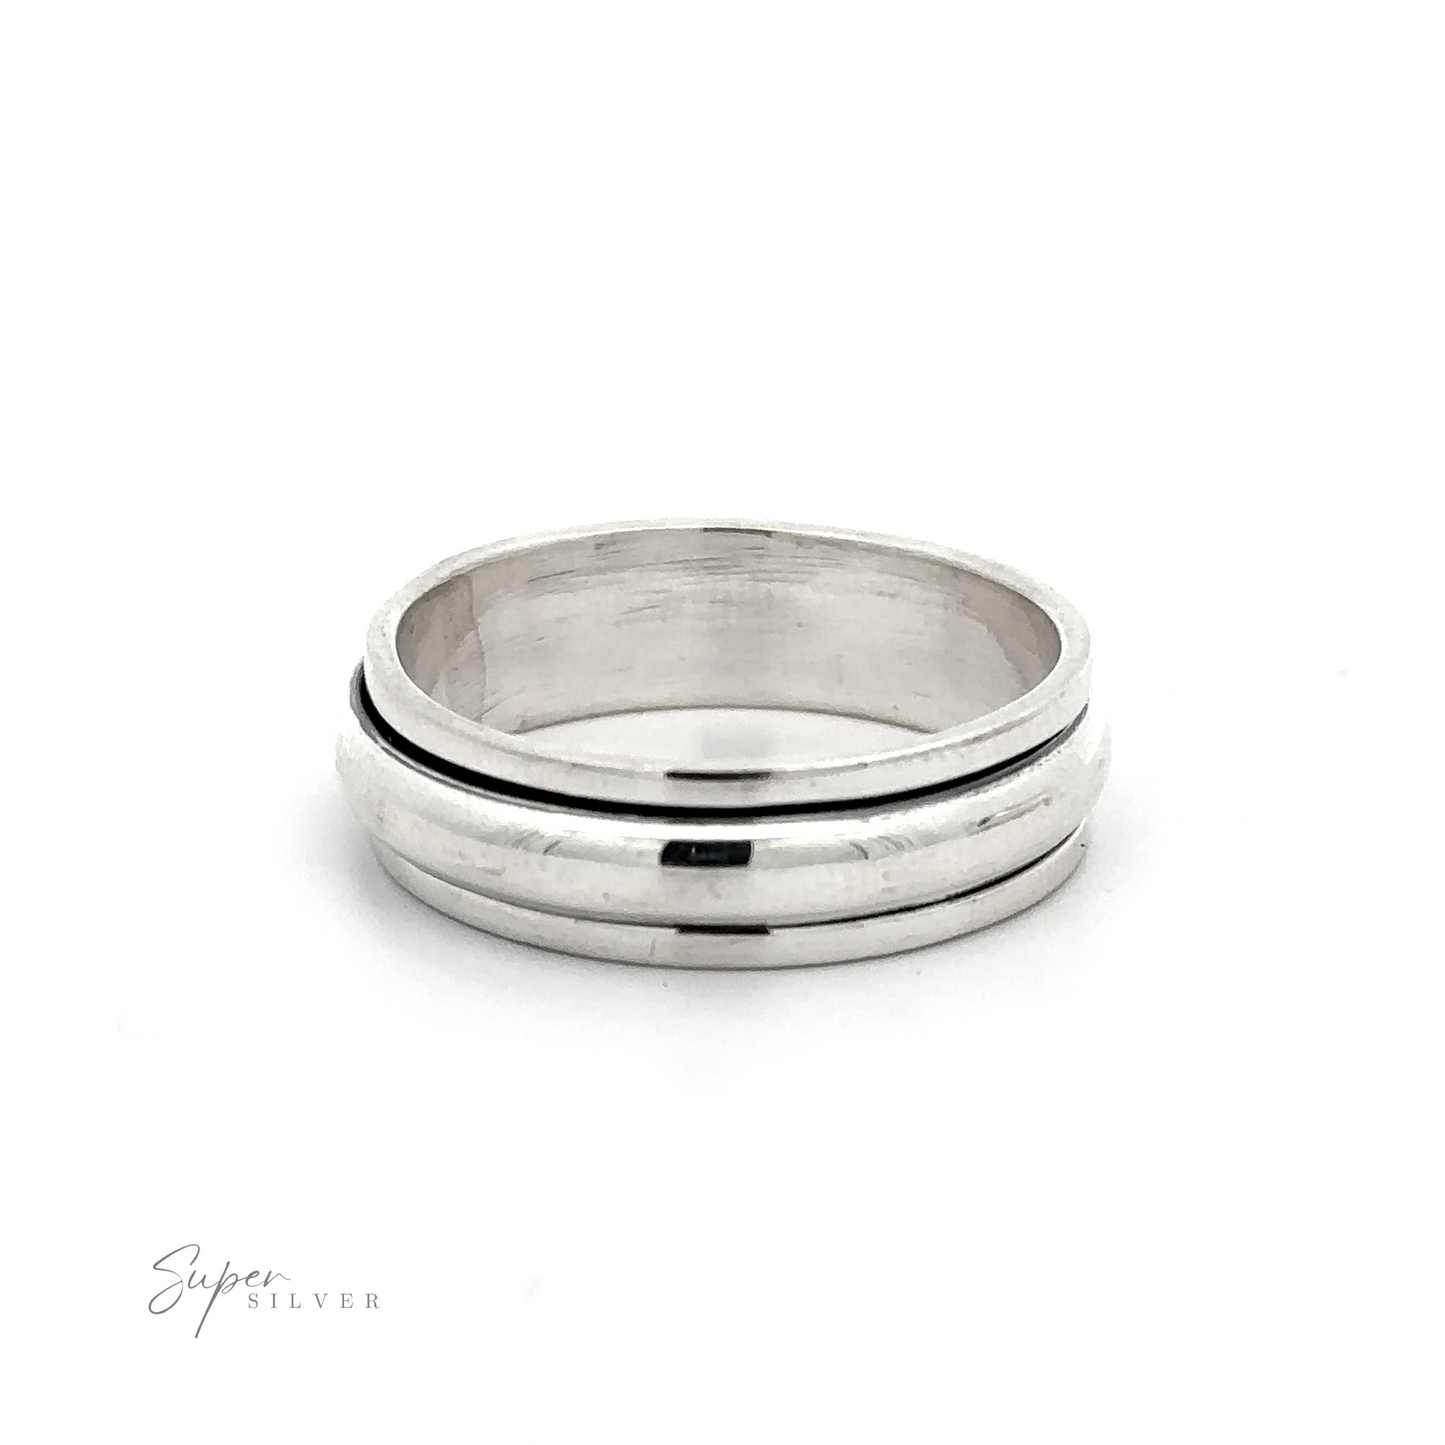 A plain rounded spinner ring with two rows of ridges, perfect for everyday wear.